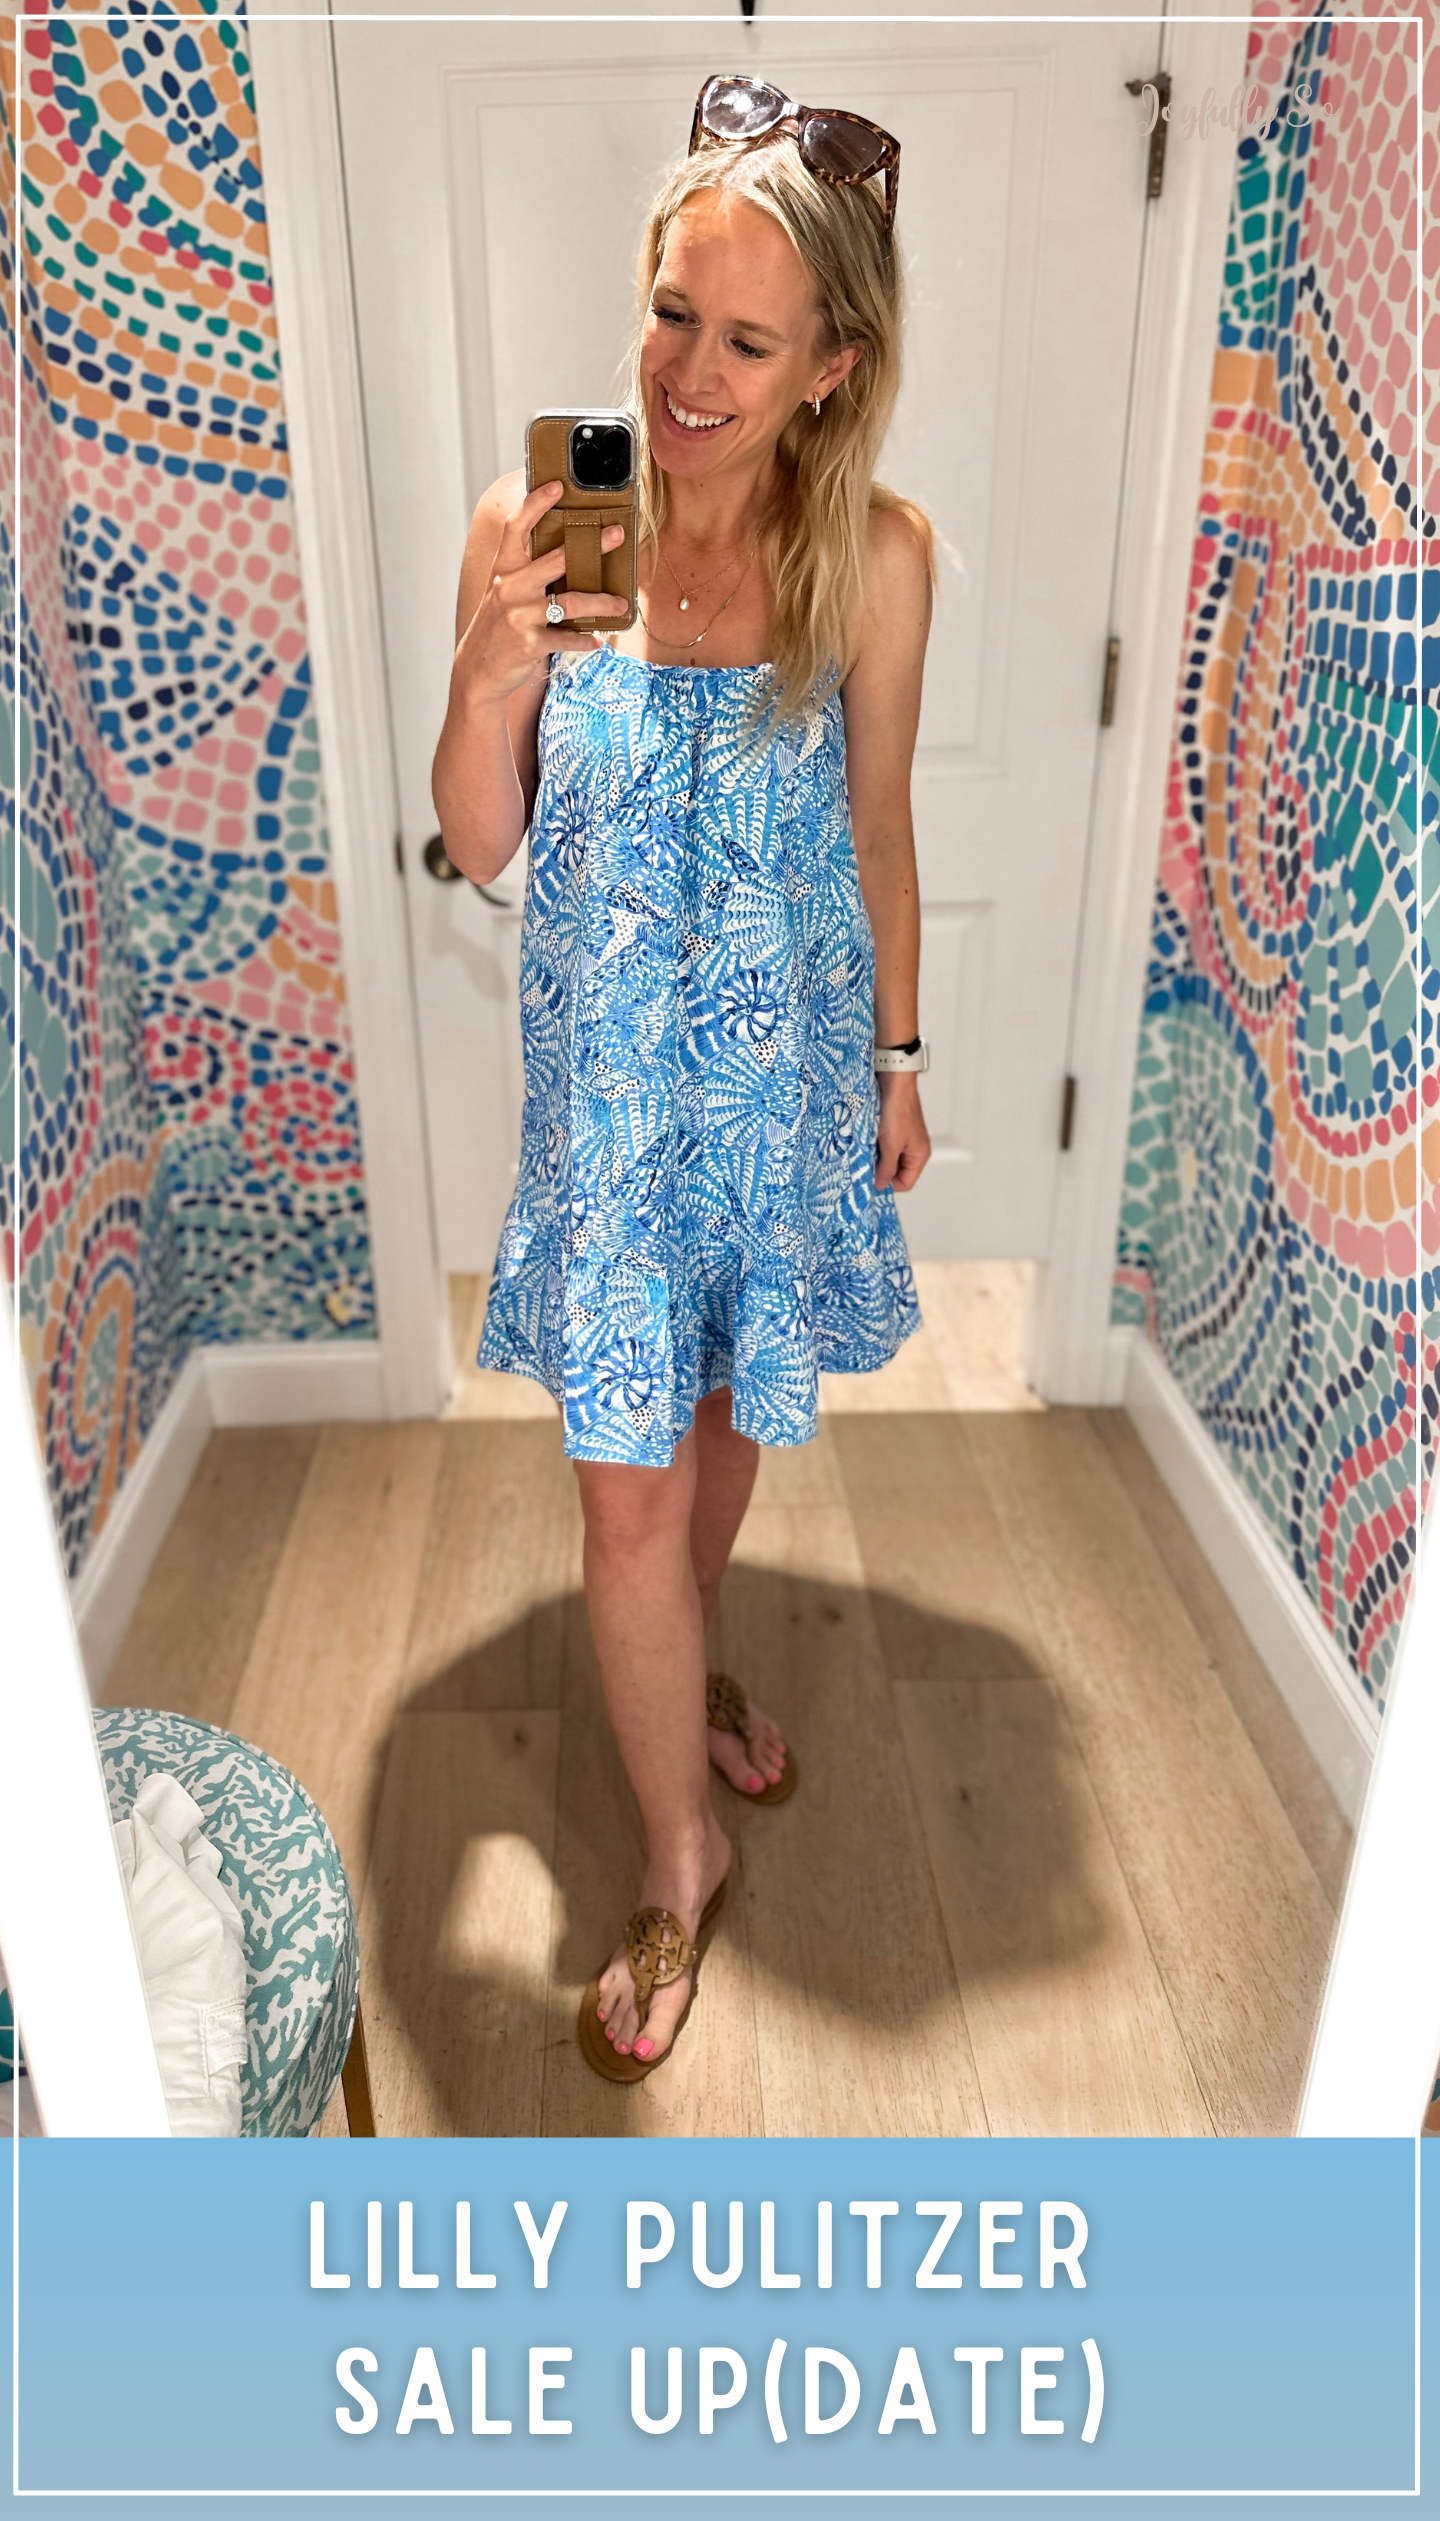 Lilly Pulitzer Sunshine Sale dates and predictions